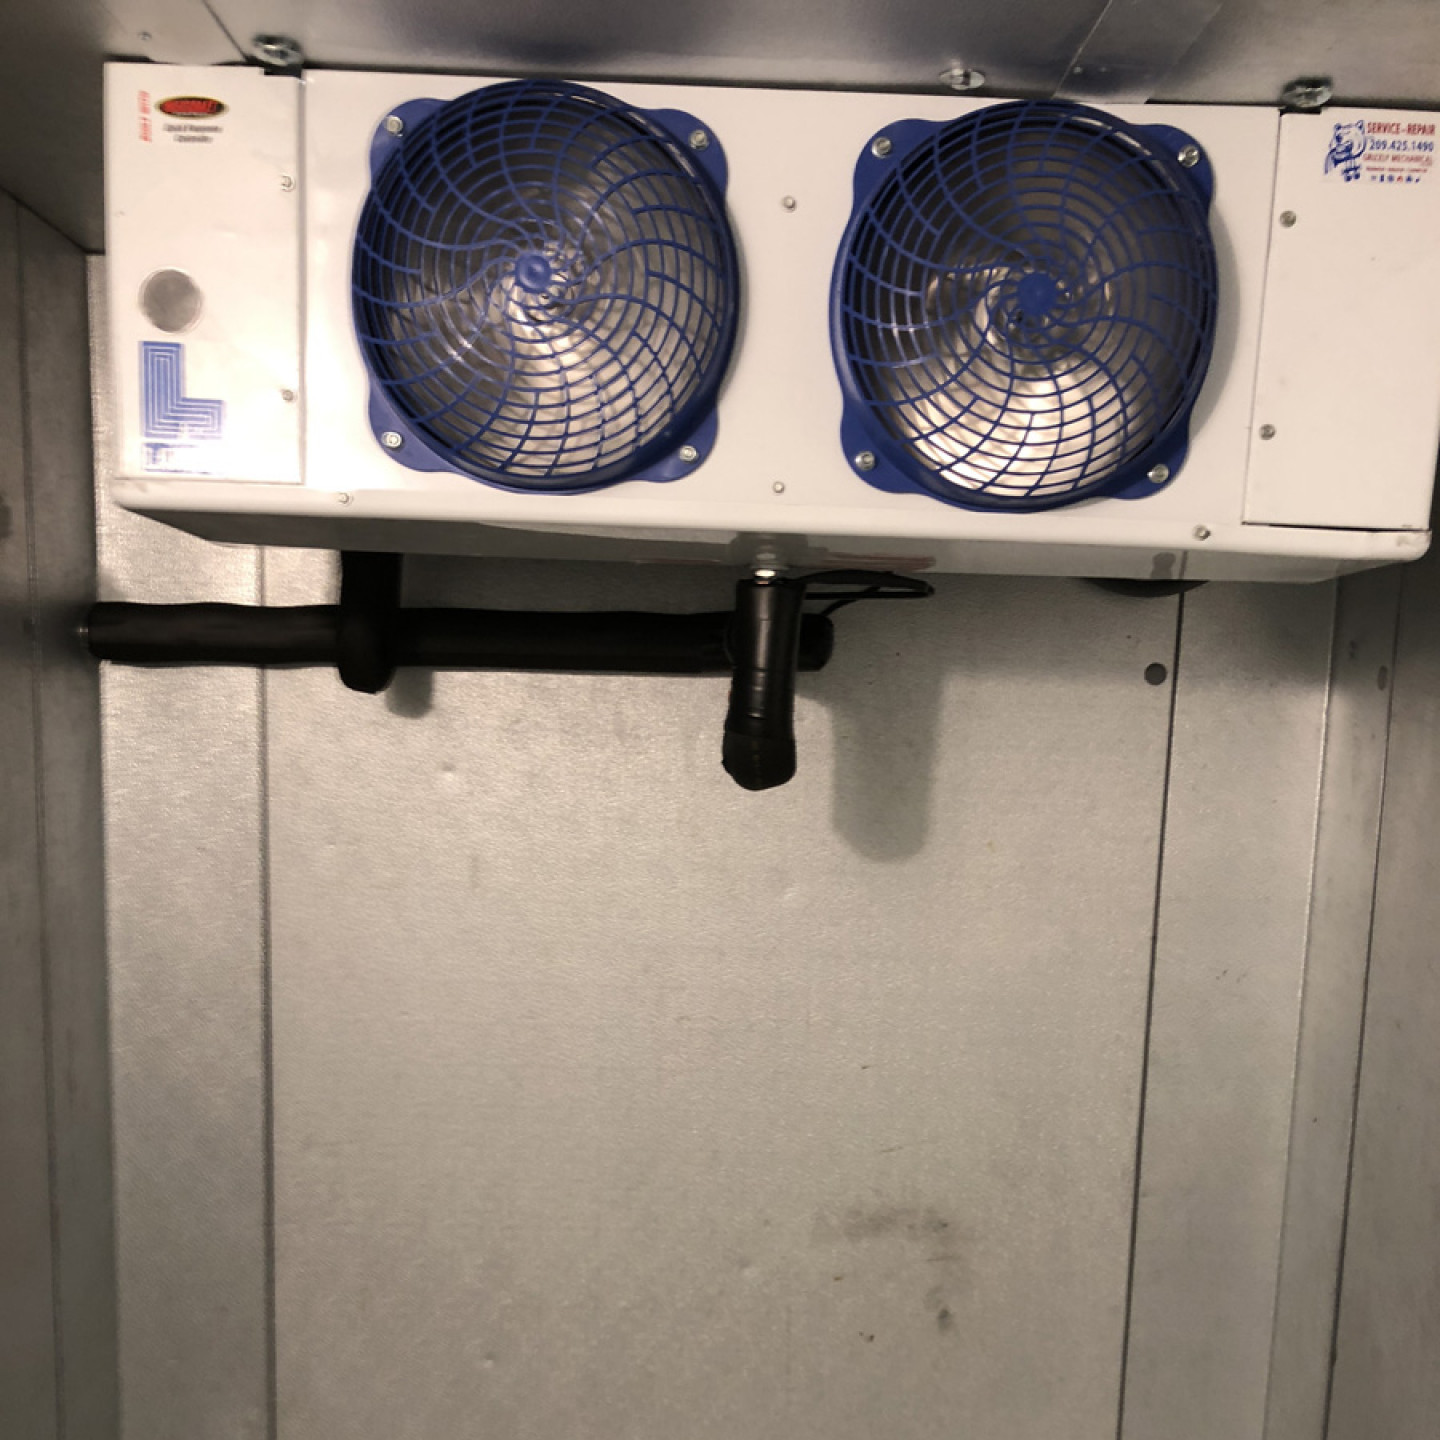 Grizzly Heating and Air in Lockeford - Commercial Refrigeration